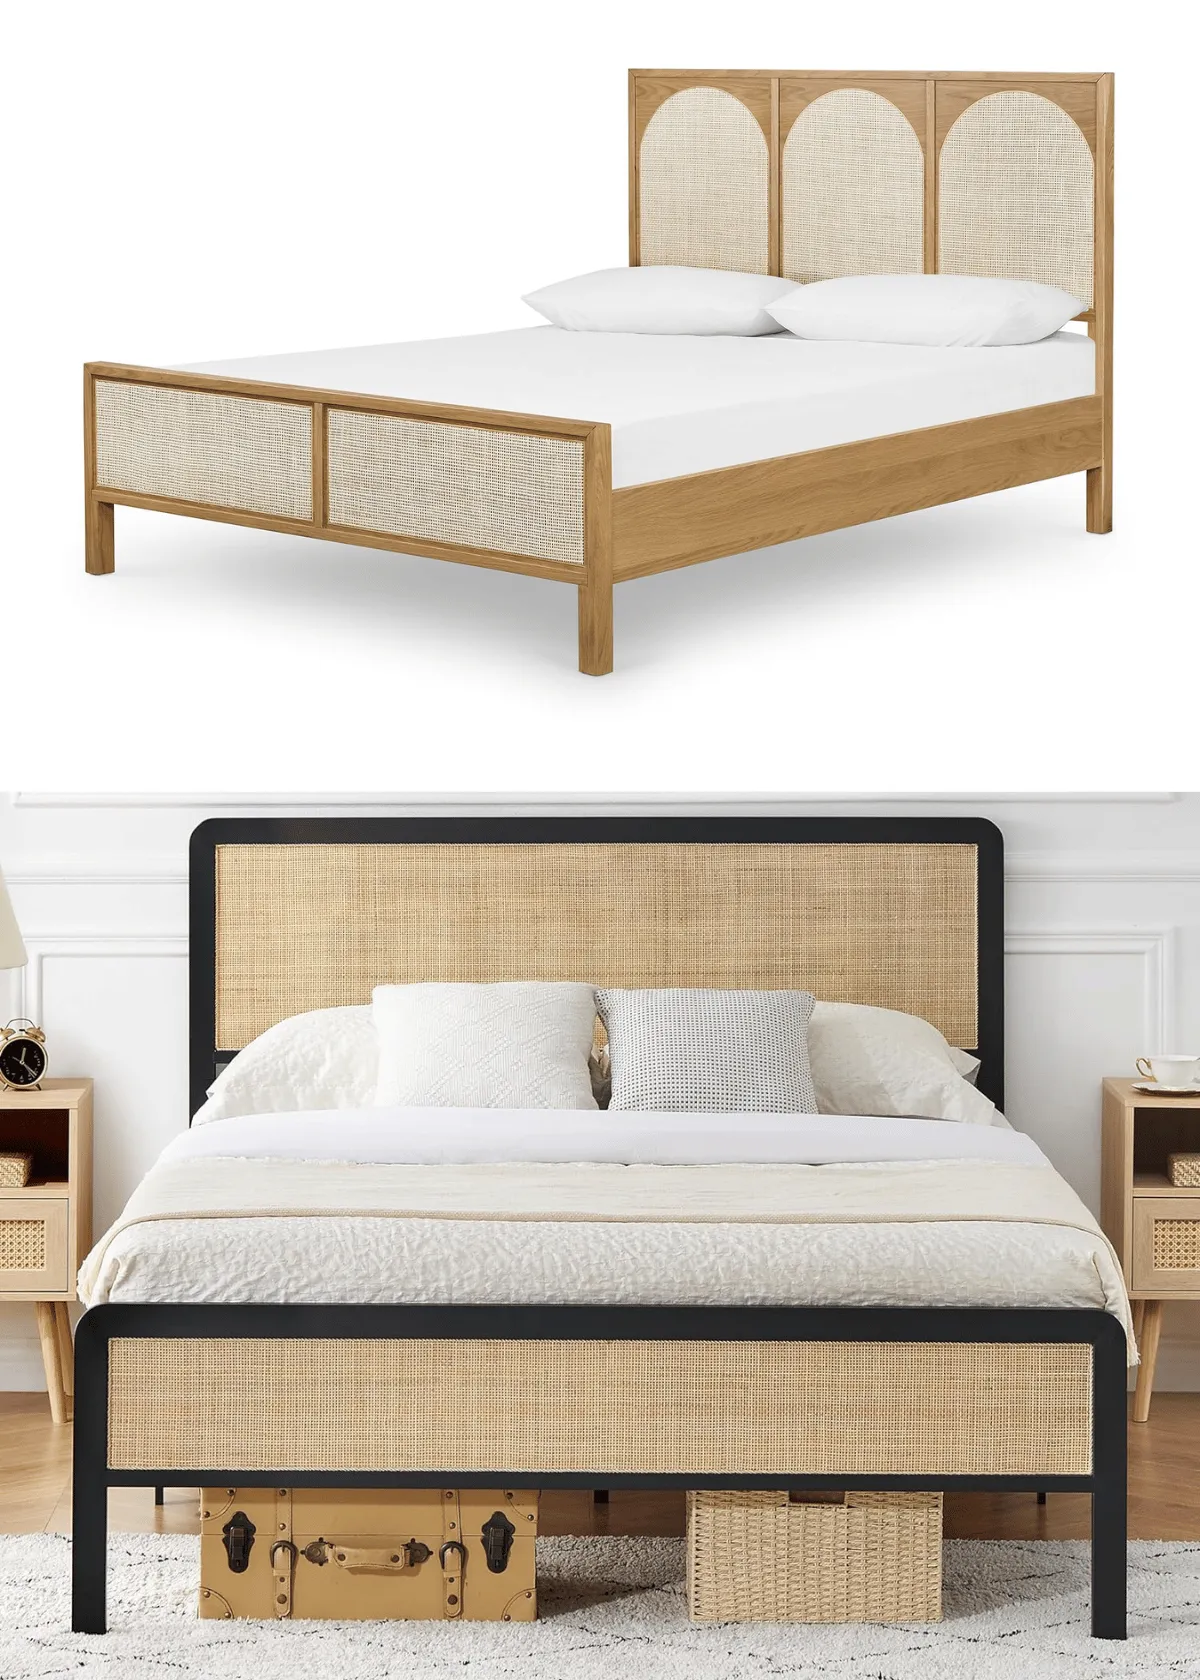 "The Best Rattan Bed Frame for a Cozy Room: 7 Stylish Picks"